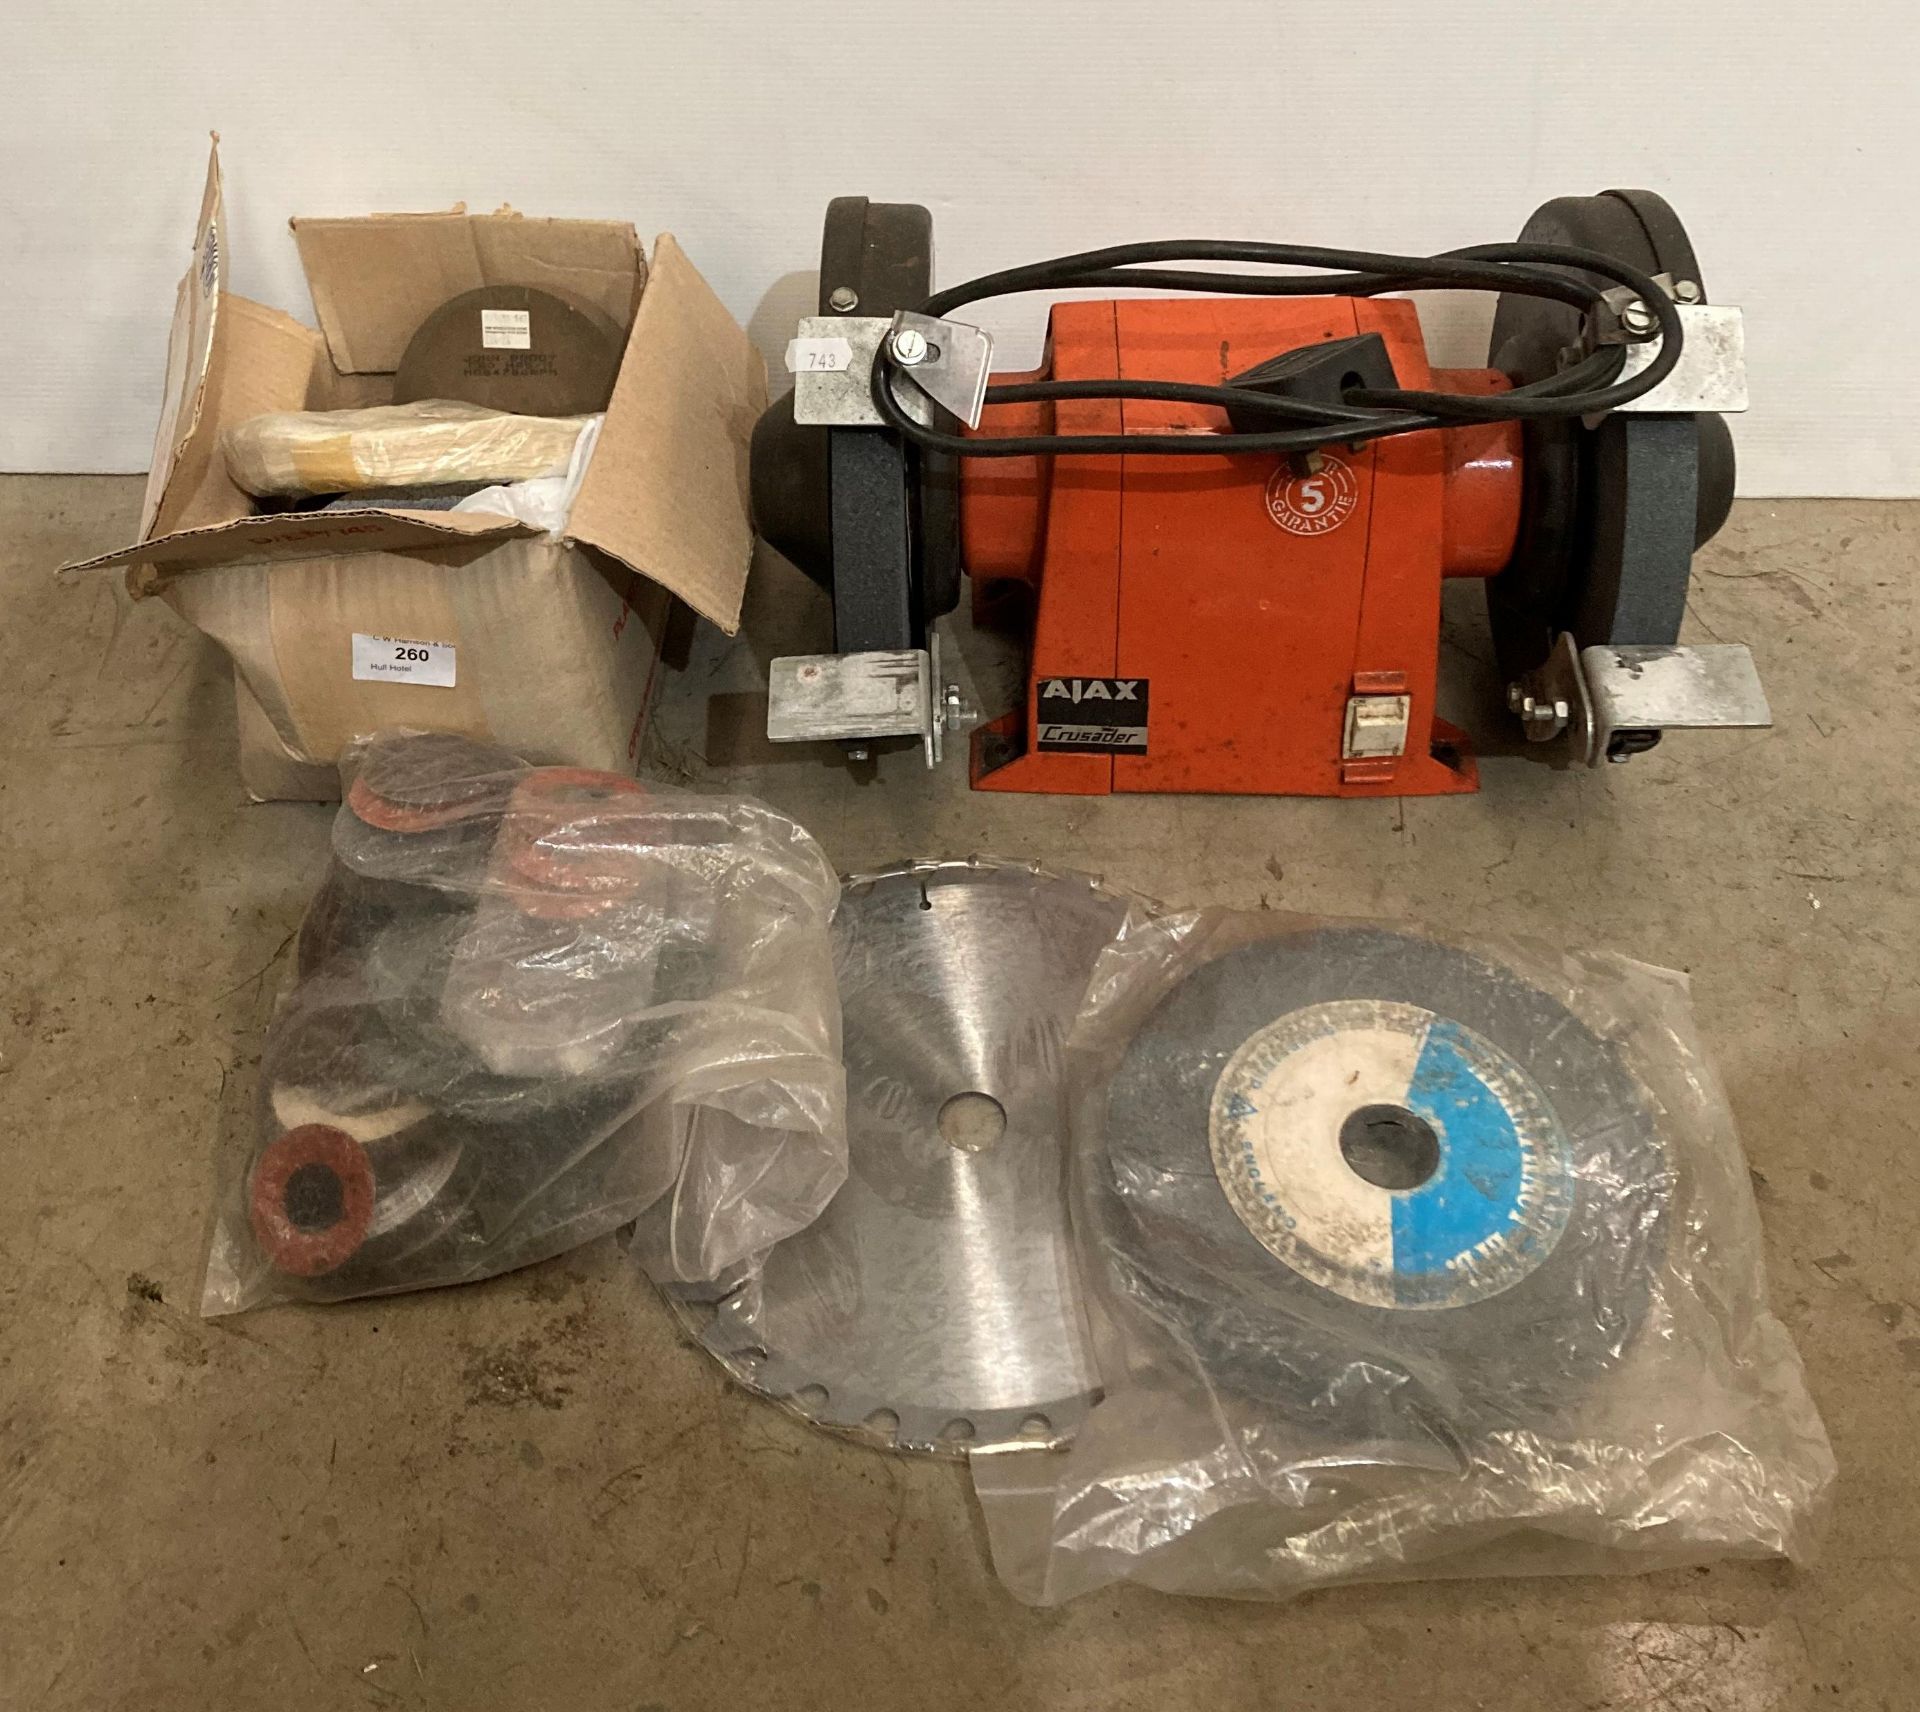 Ajax crusader double-headed grinder (240v) and a box of assorted grinding, polishing, sanding,